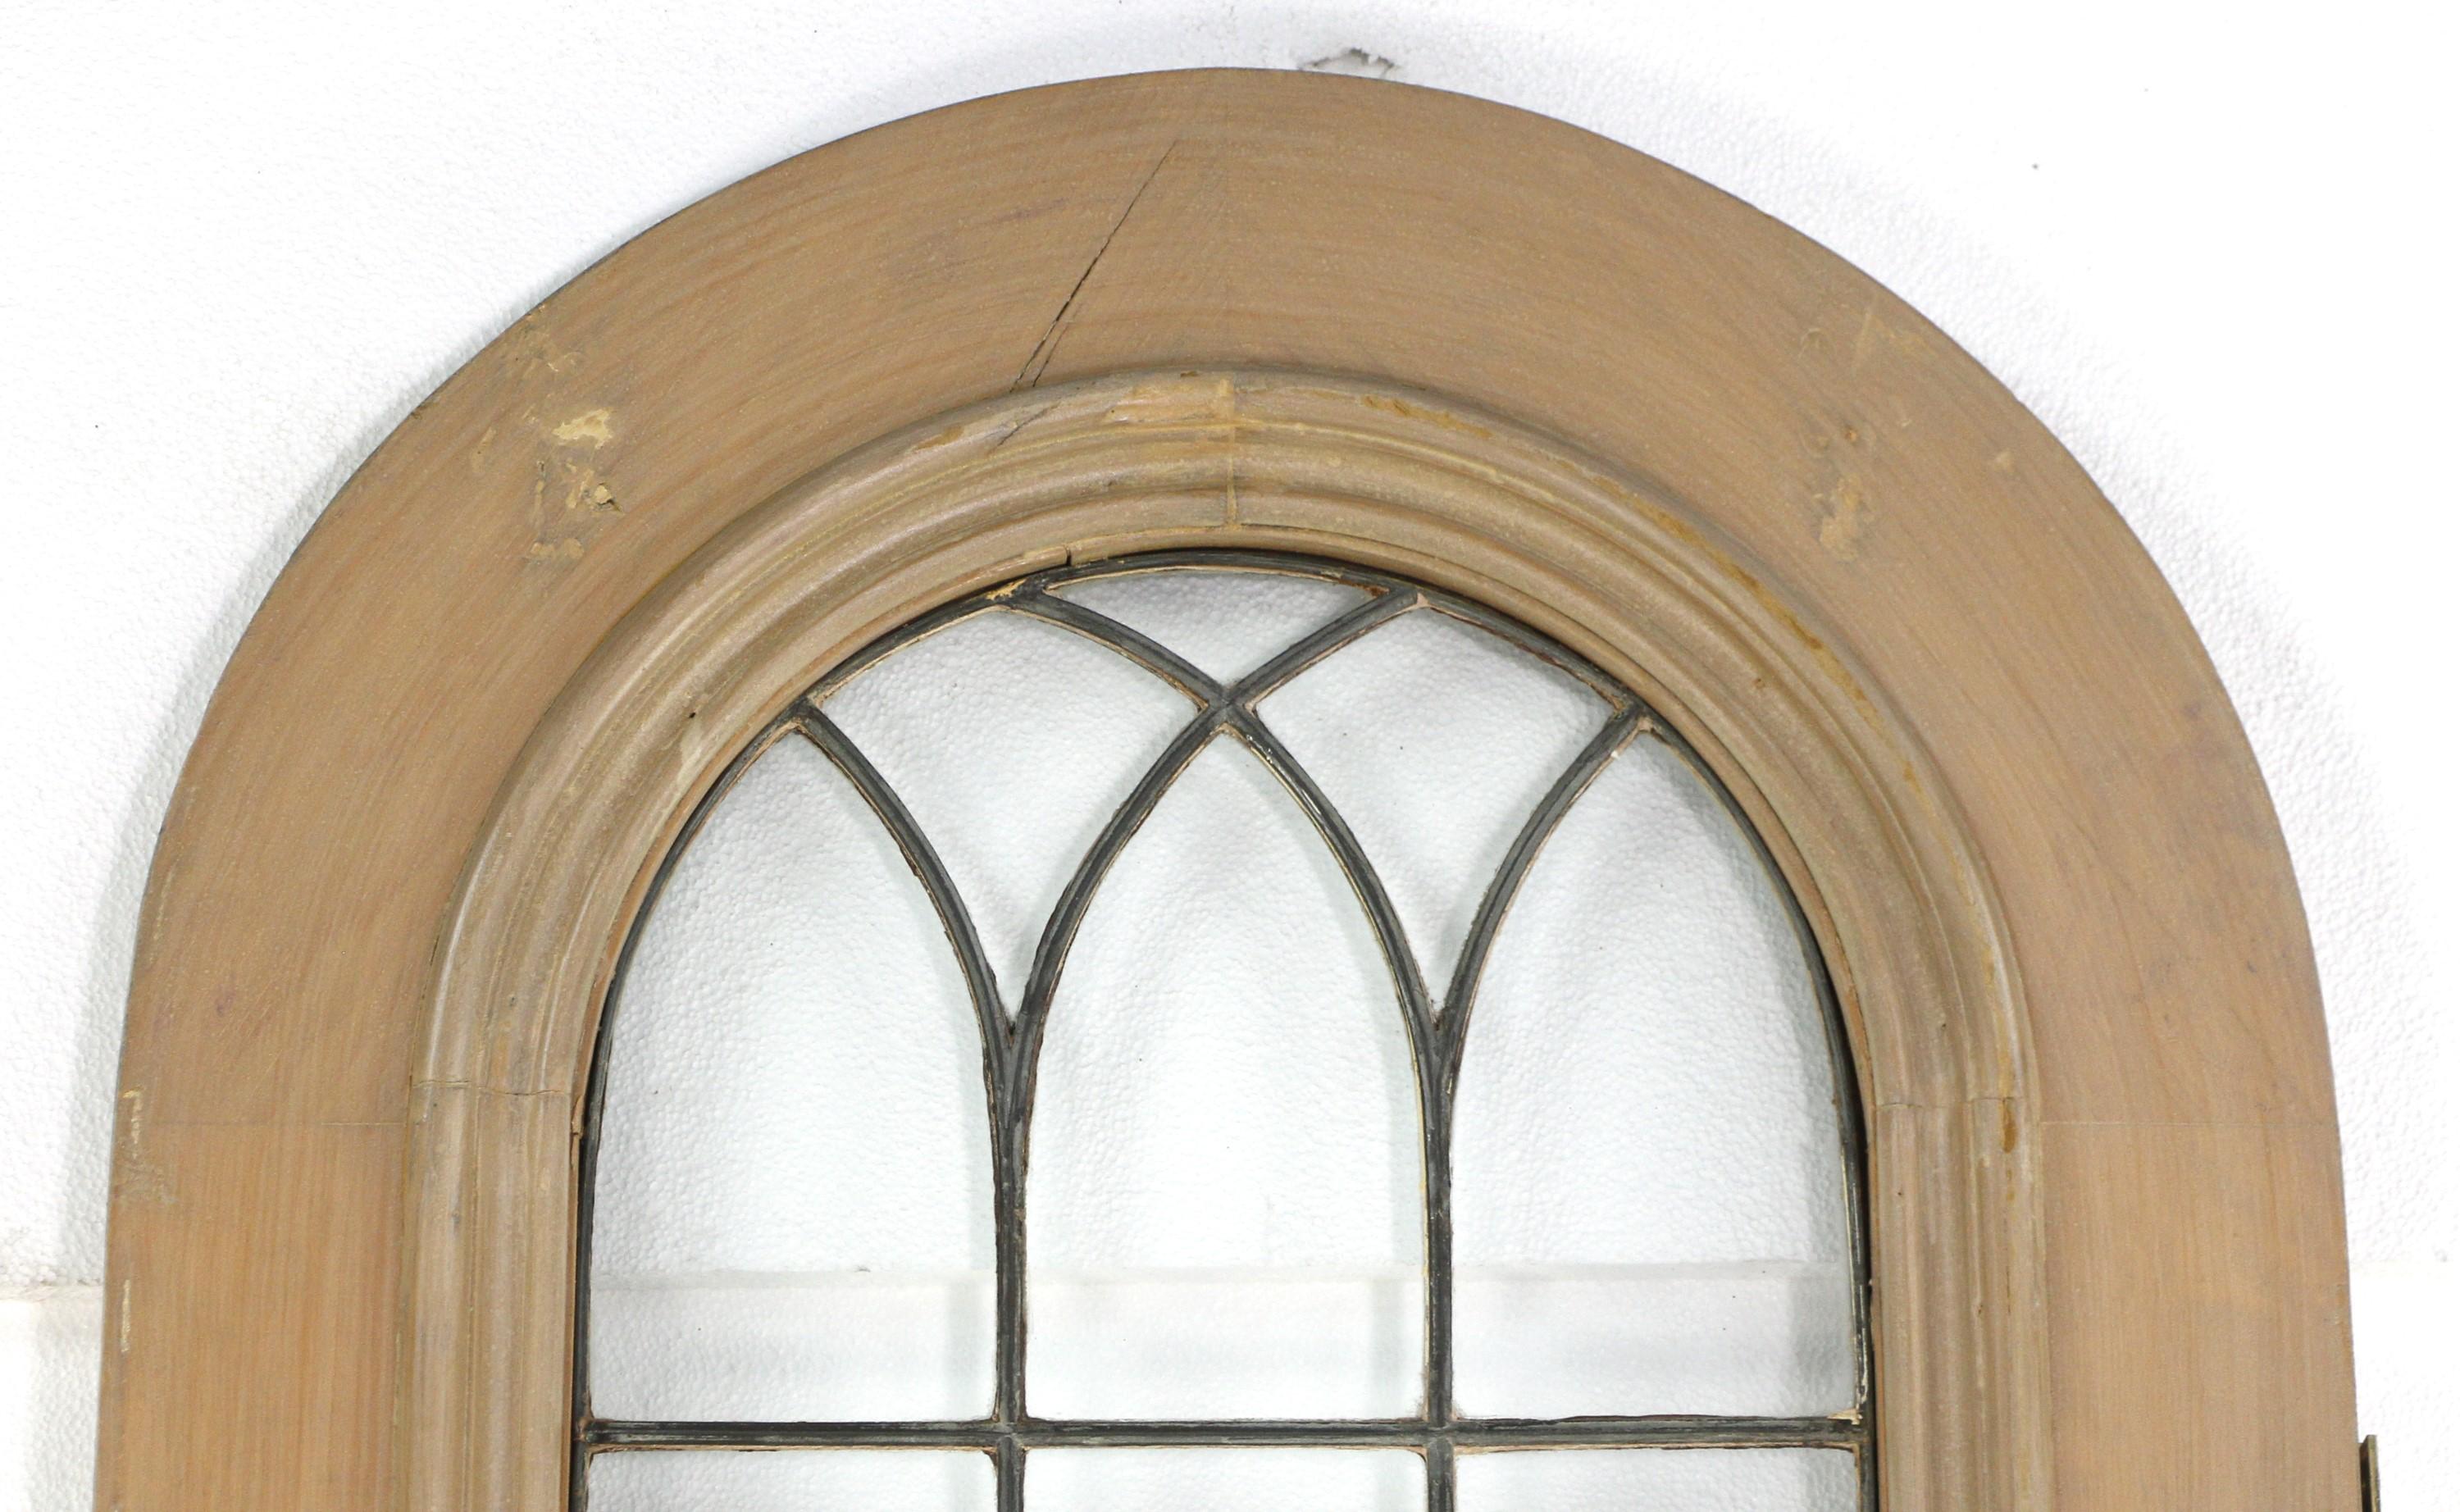 Wood door with an arched top and finished in a light color stain. The window part is divided into 21 leaded clear glass panes. The bottom of the door features a single wood panel. Minimal chips and some cracks in the wood frame. Please see the